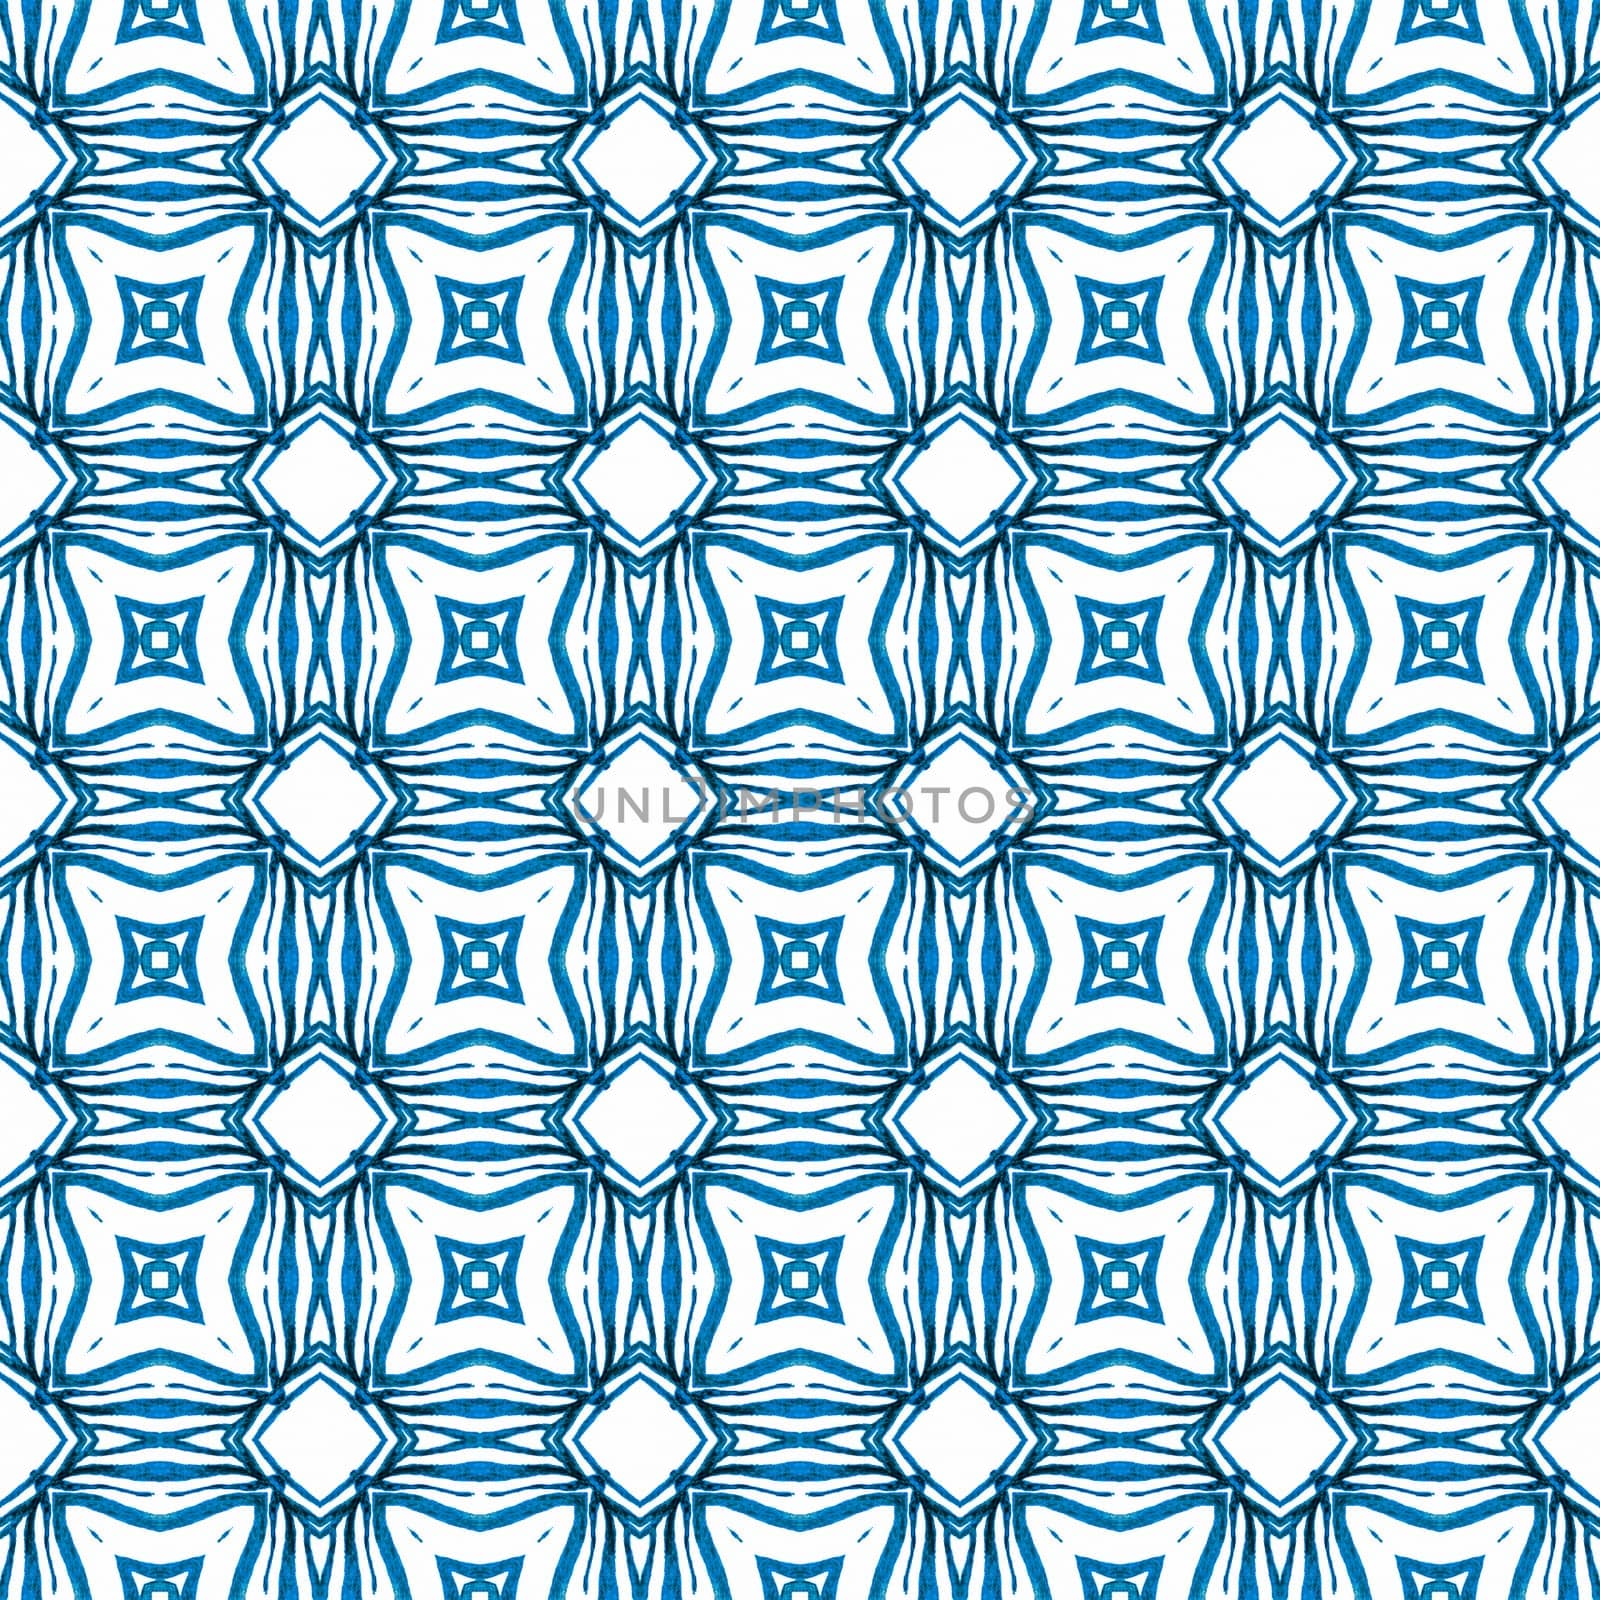 Ethnic hand painted pattern. Blue great boho chic summer design. Watercolor summer ethnic border pattern. Textile ready mind-blowing print, swimwear fabric, wallpaper, wrapping.